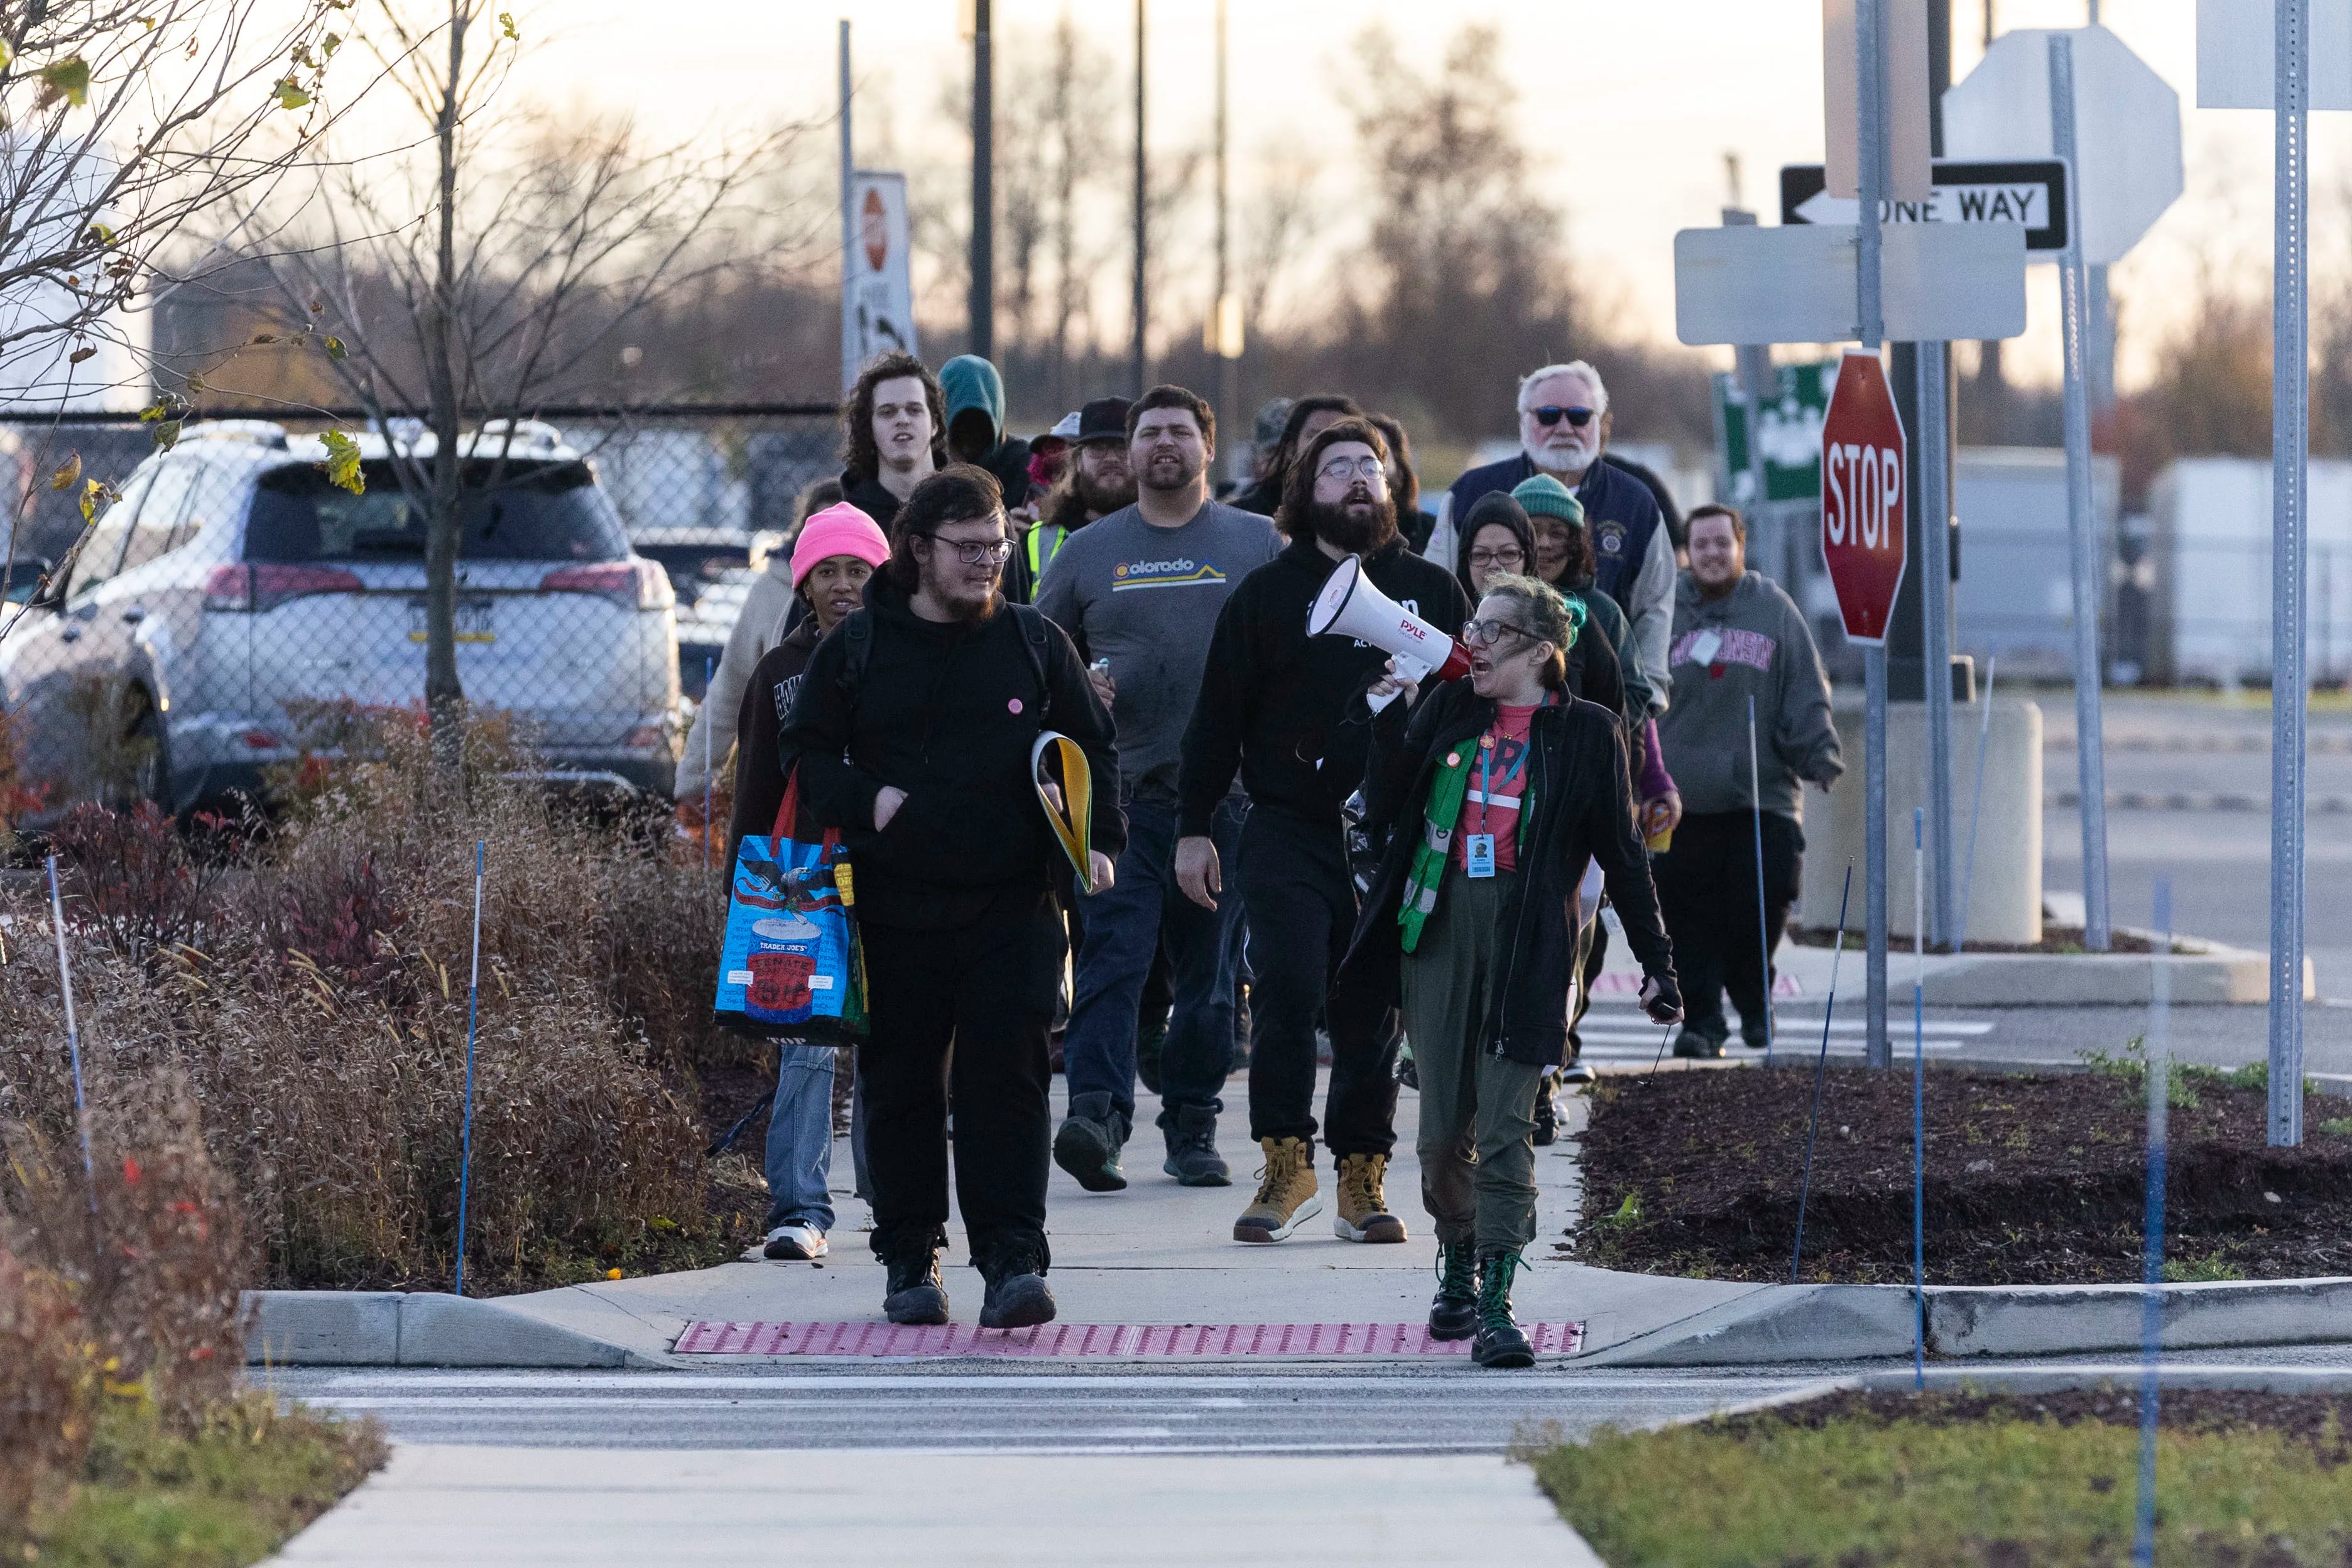 Amazon employees walked out of the facility in West Deptford on Nov. 27. The Amazon workers walked off the job on Cyber Monday to demand better pay and working conditions. Workers also asked for the company to recognize all workers' right to organize.